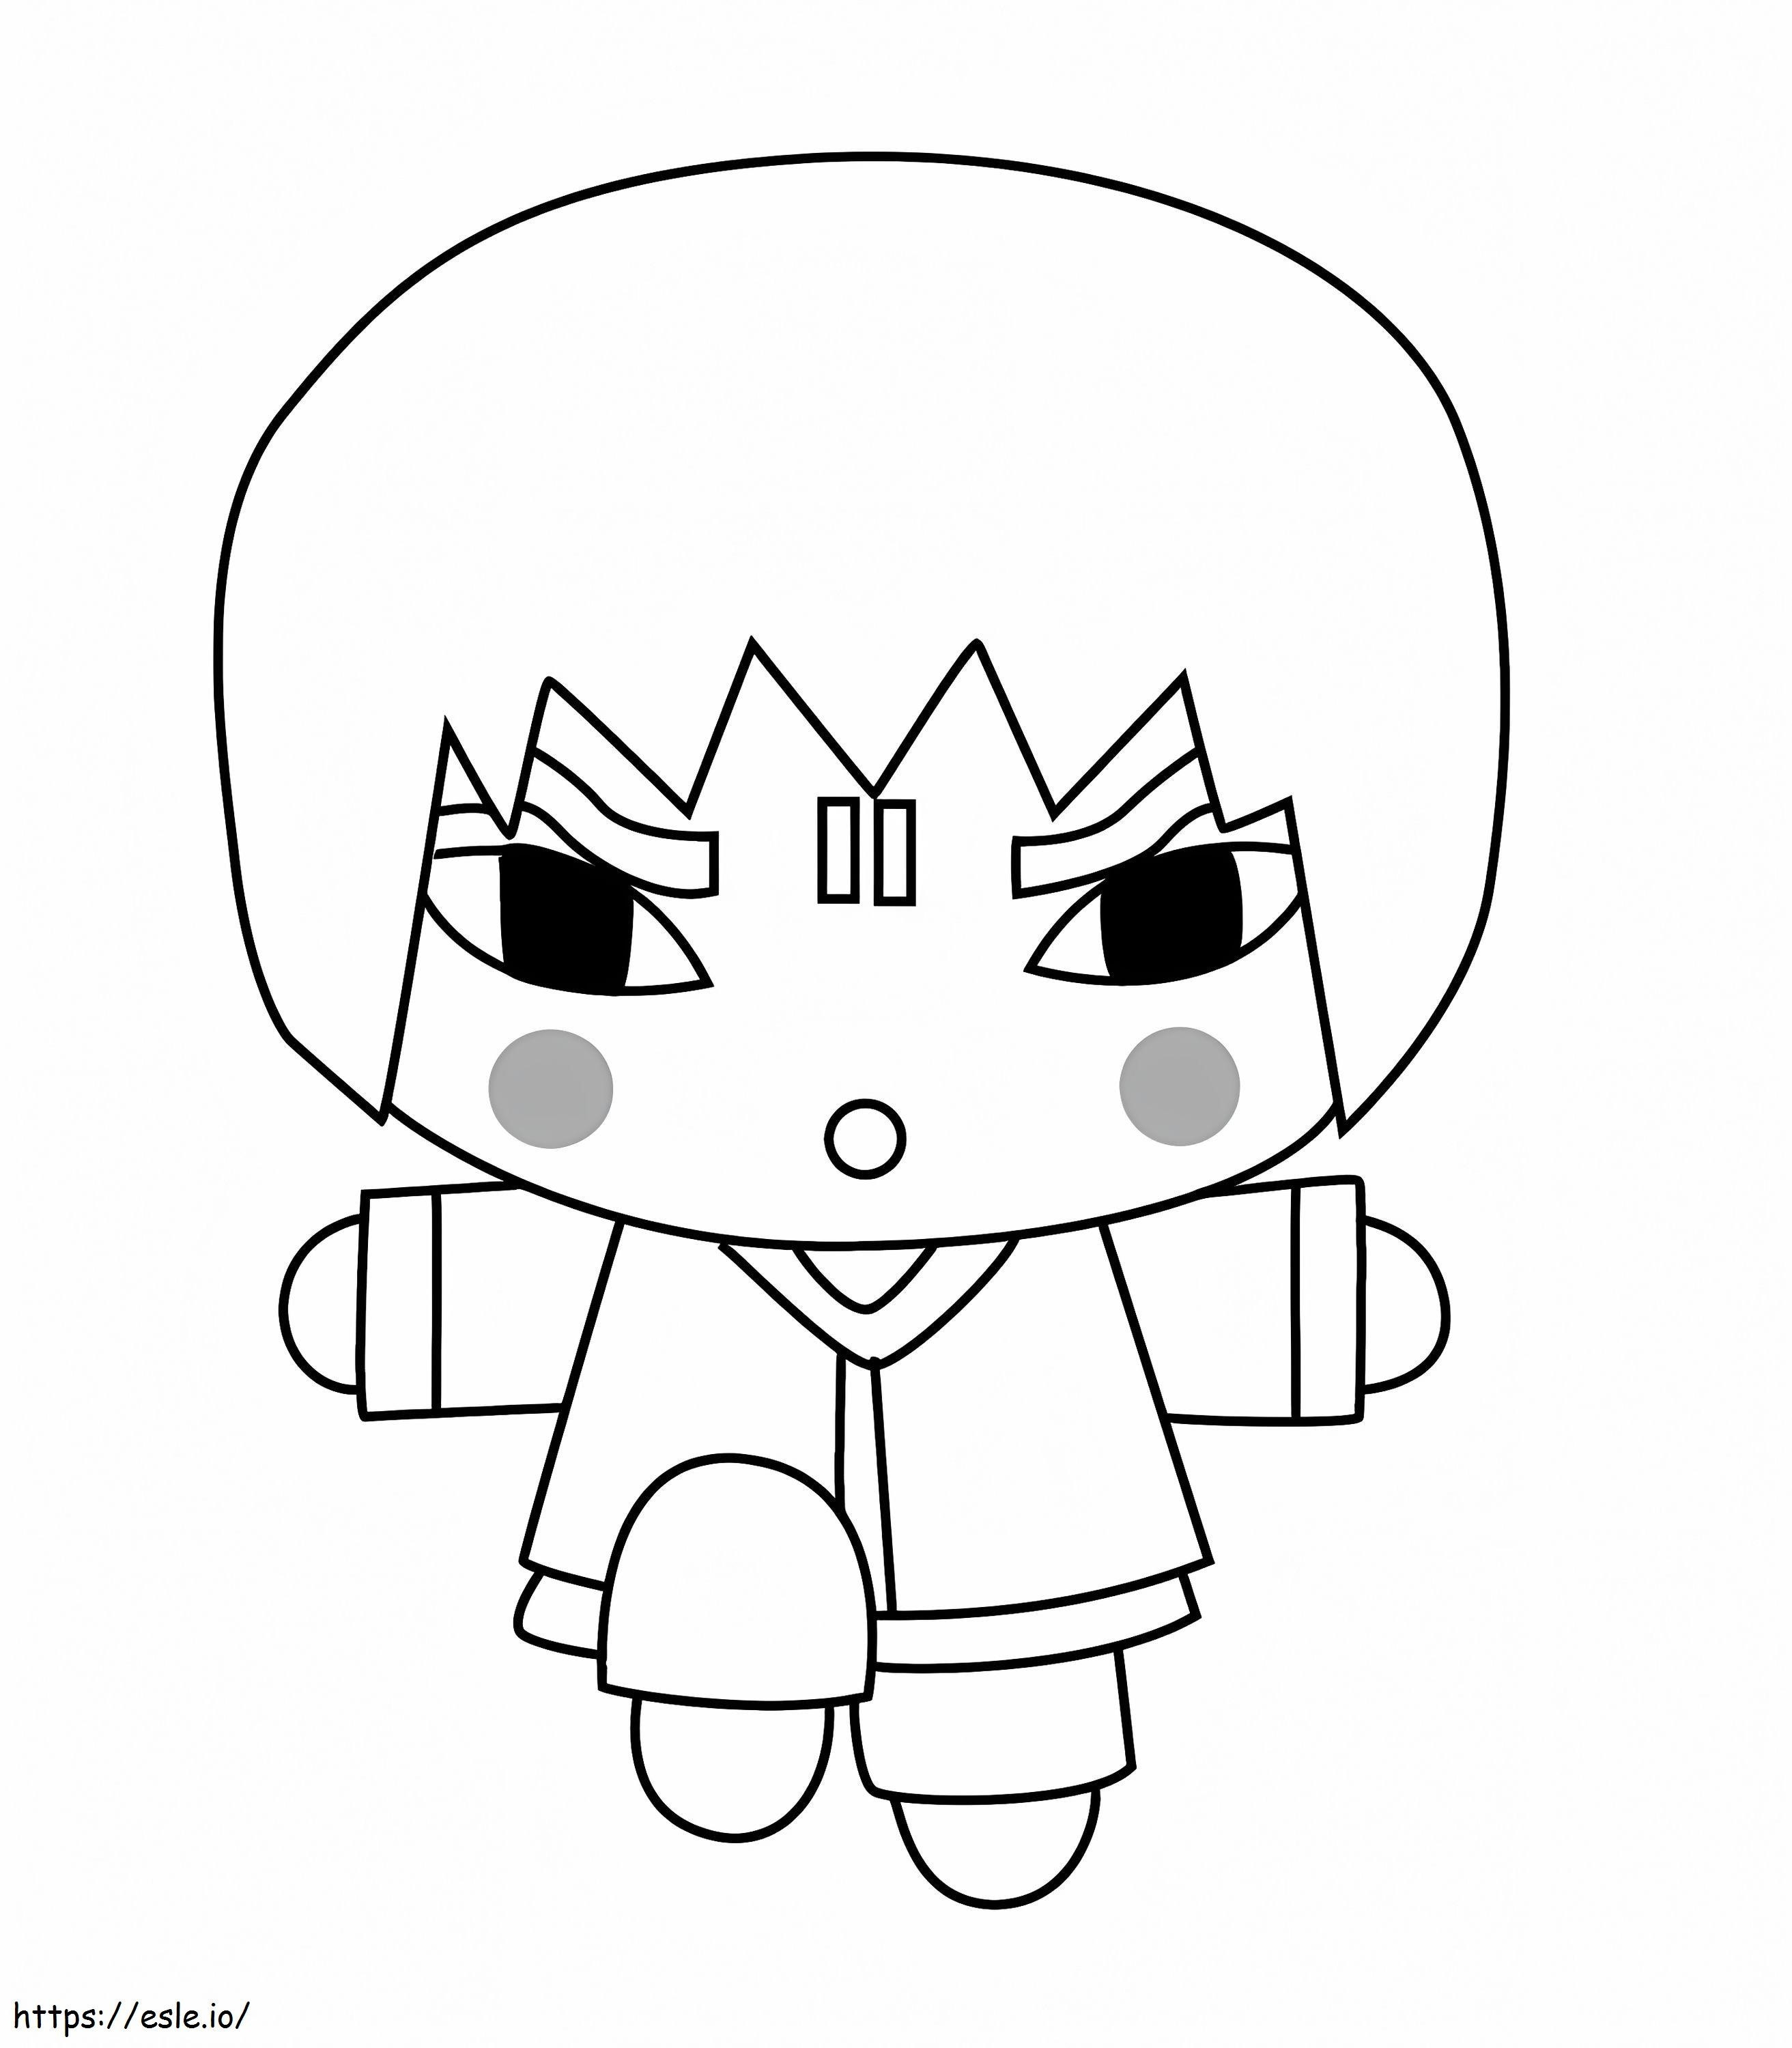 1596499853 How To Draw Abyo From Pucca Step 0 coloring page